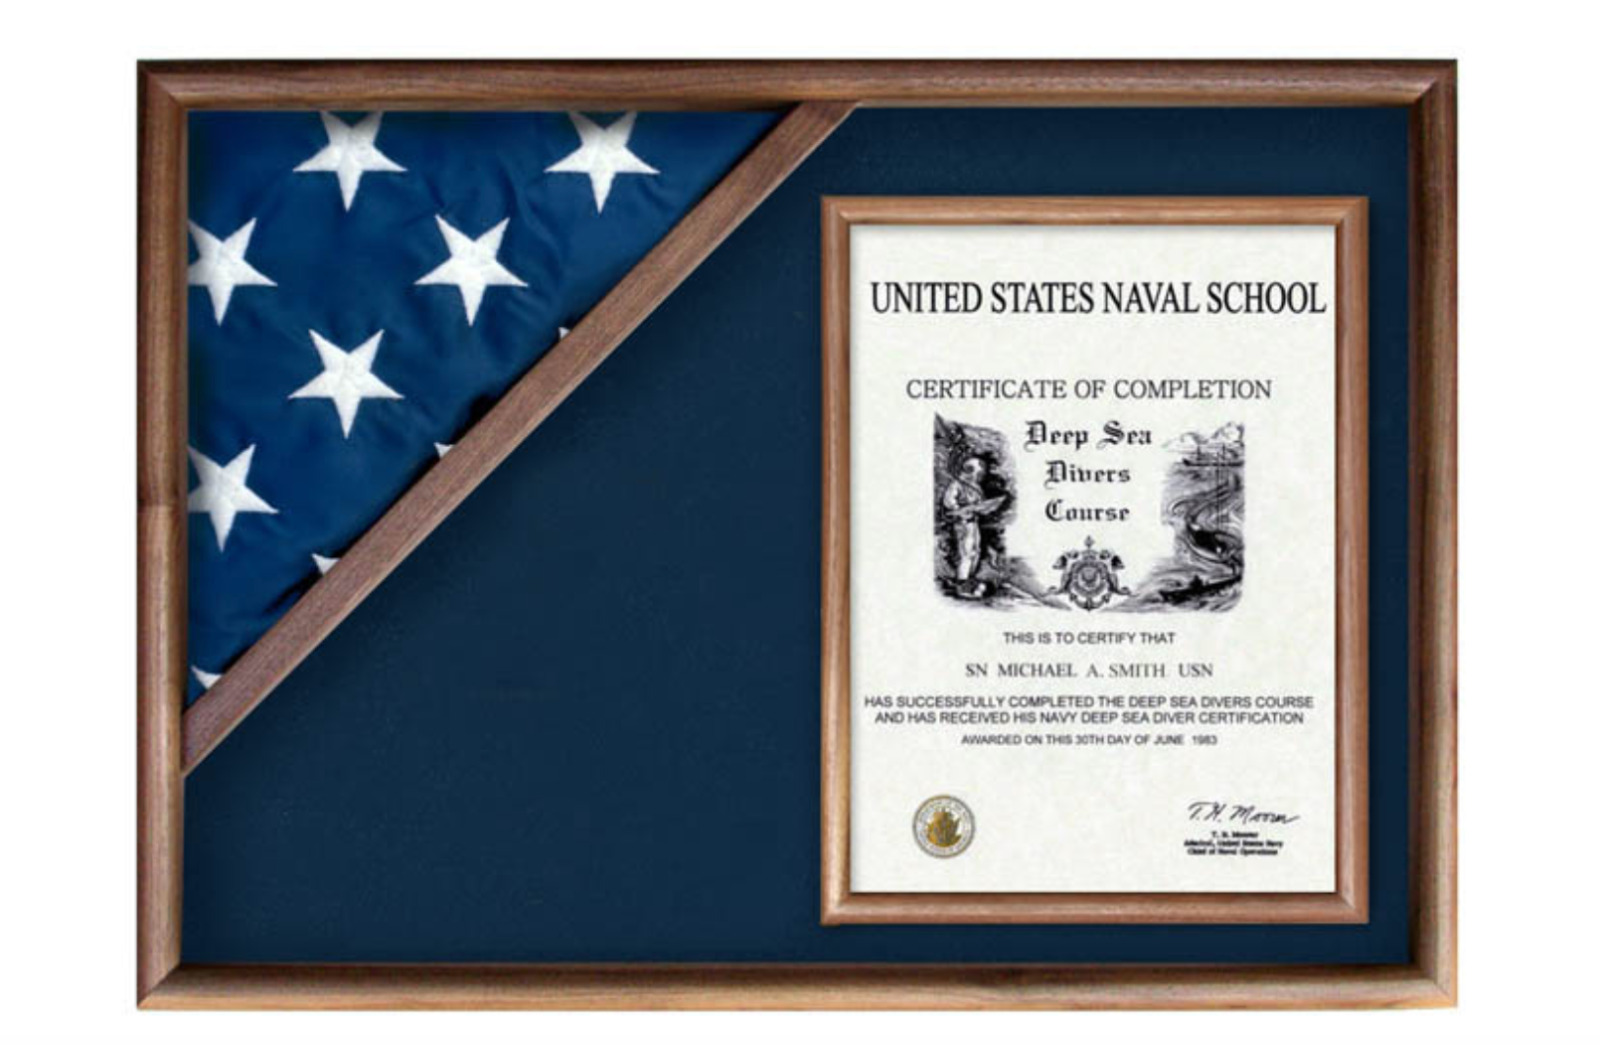 MILITARY INSIGNIA AND AMERICAN FLAG CERTIFICATE DISPLAY CASE SHADOW BOX